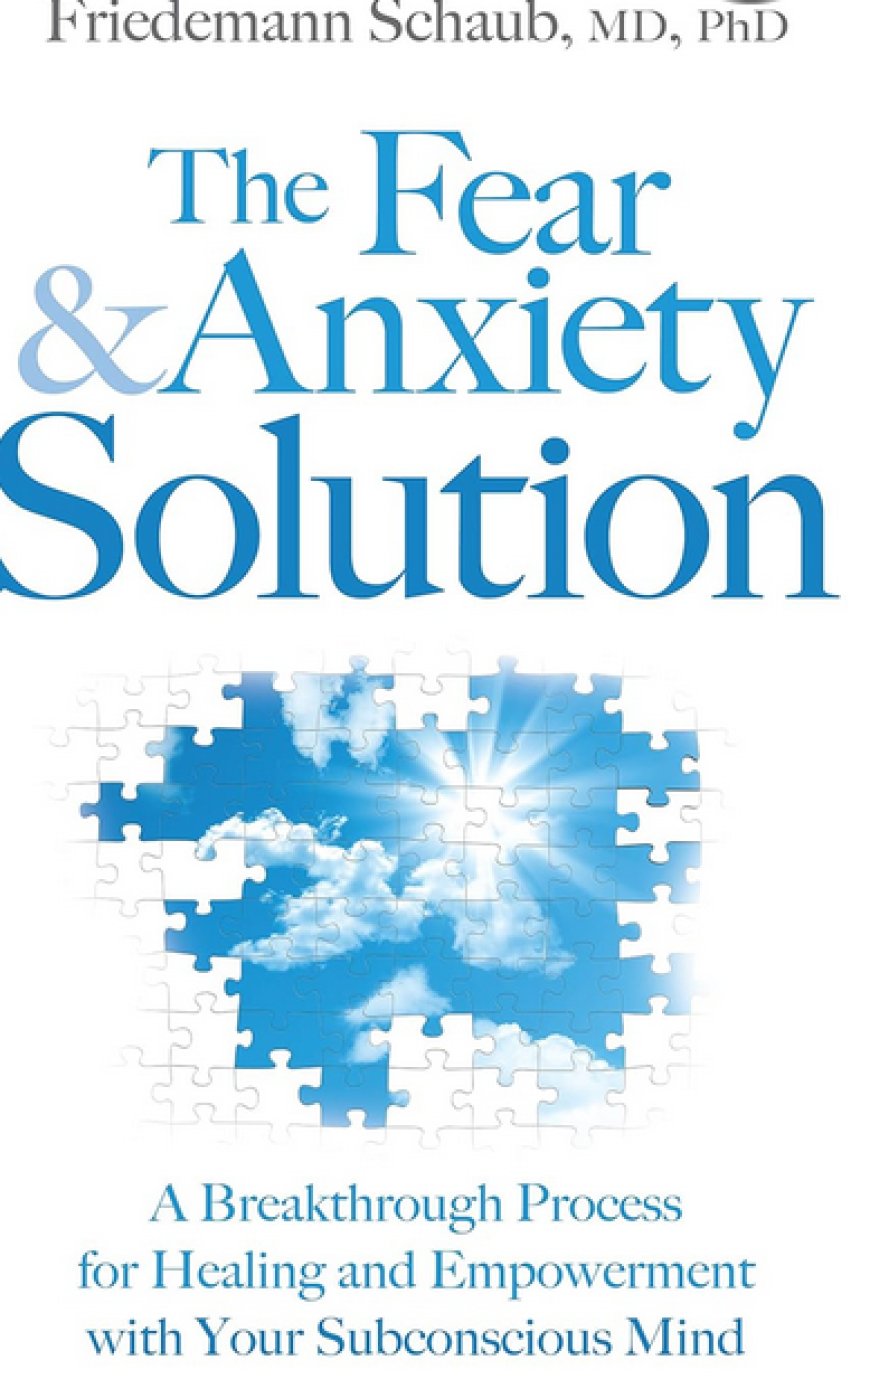 The Fear and Anxiety Solution